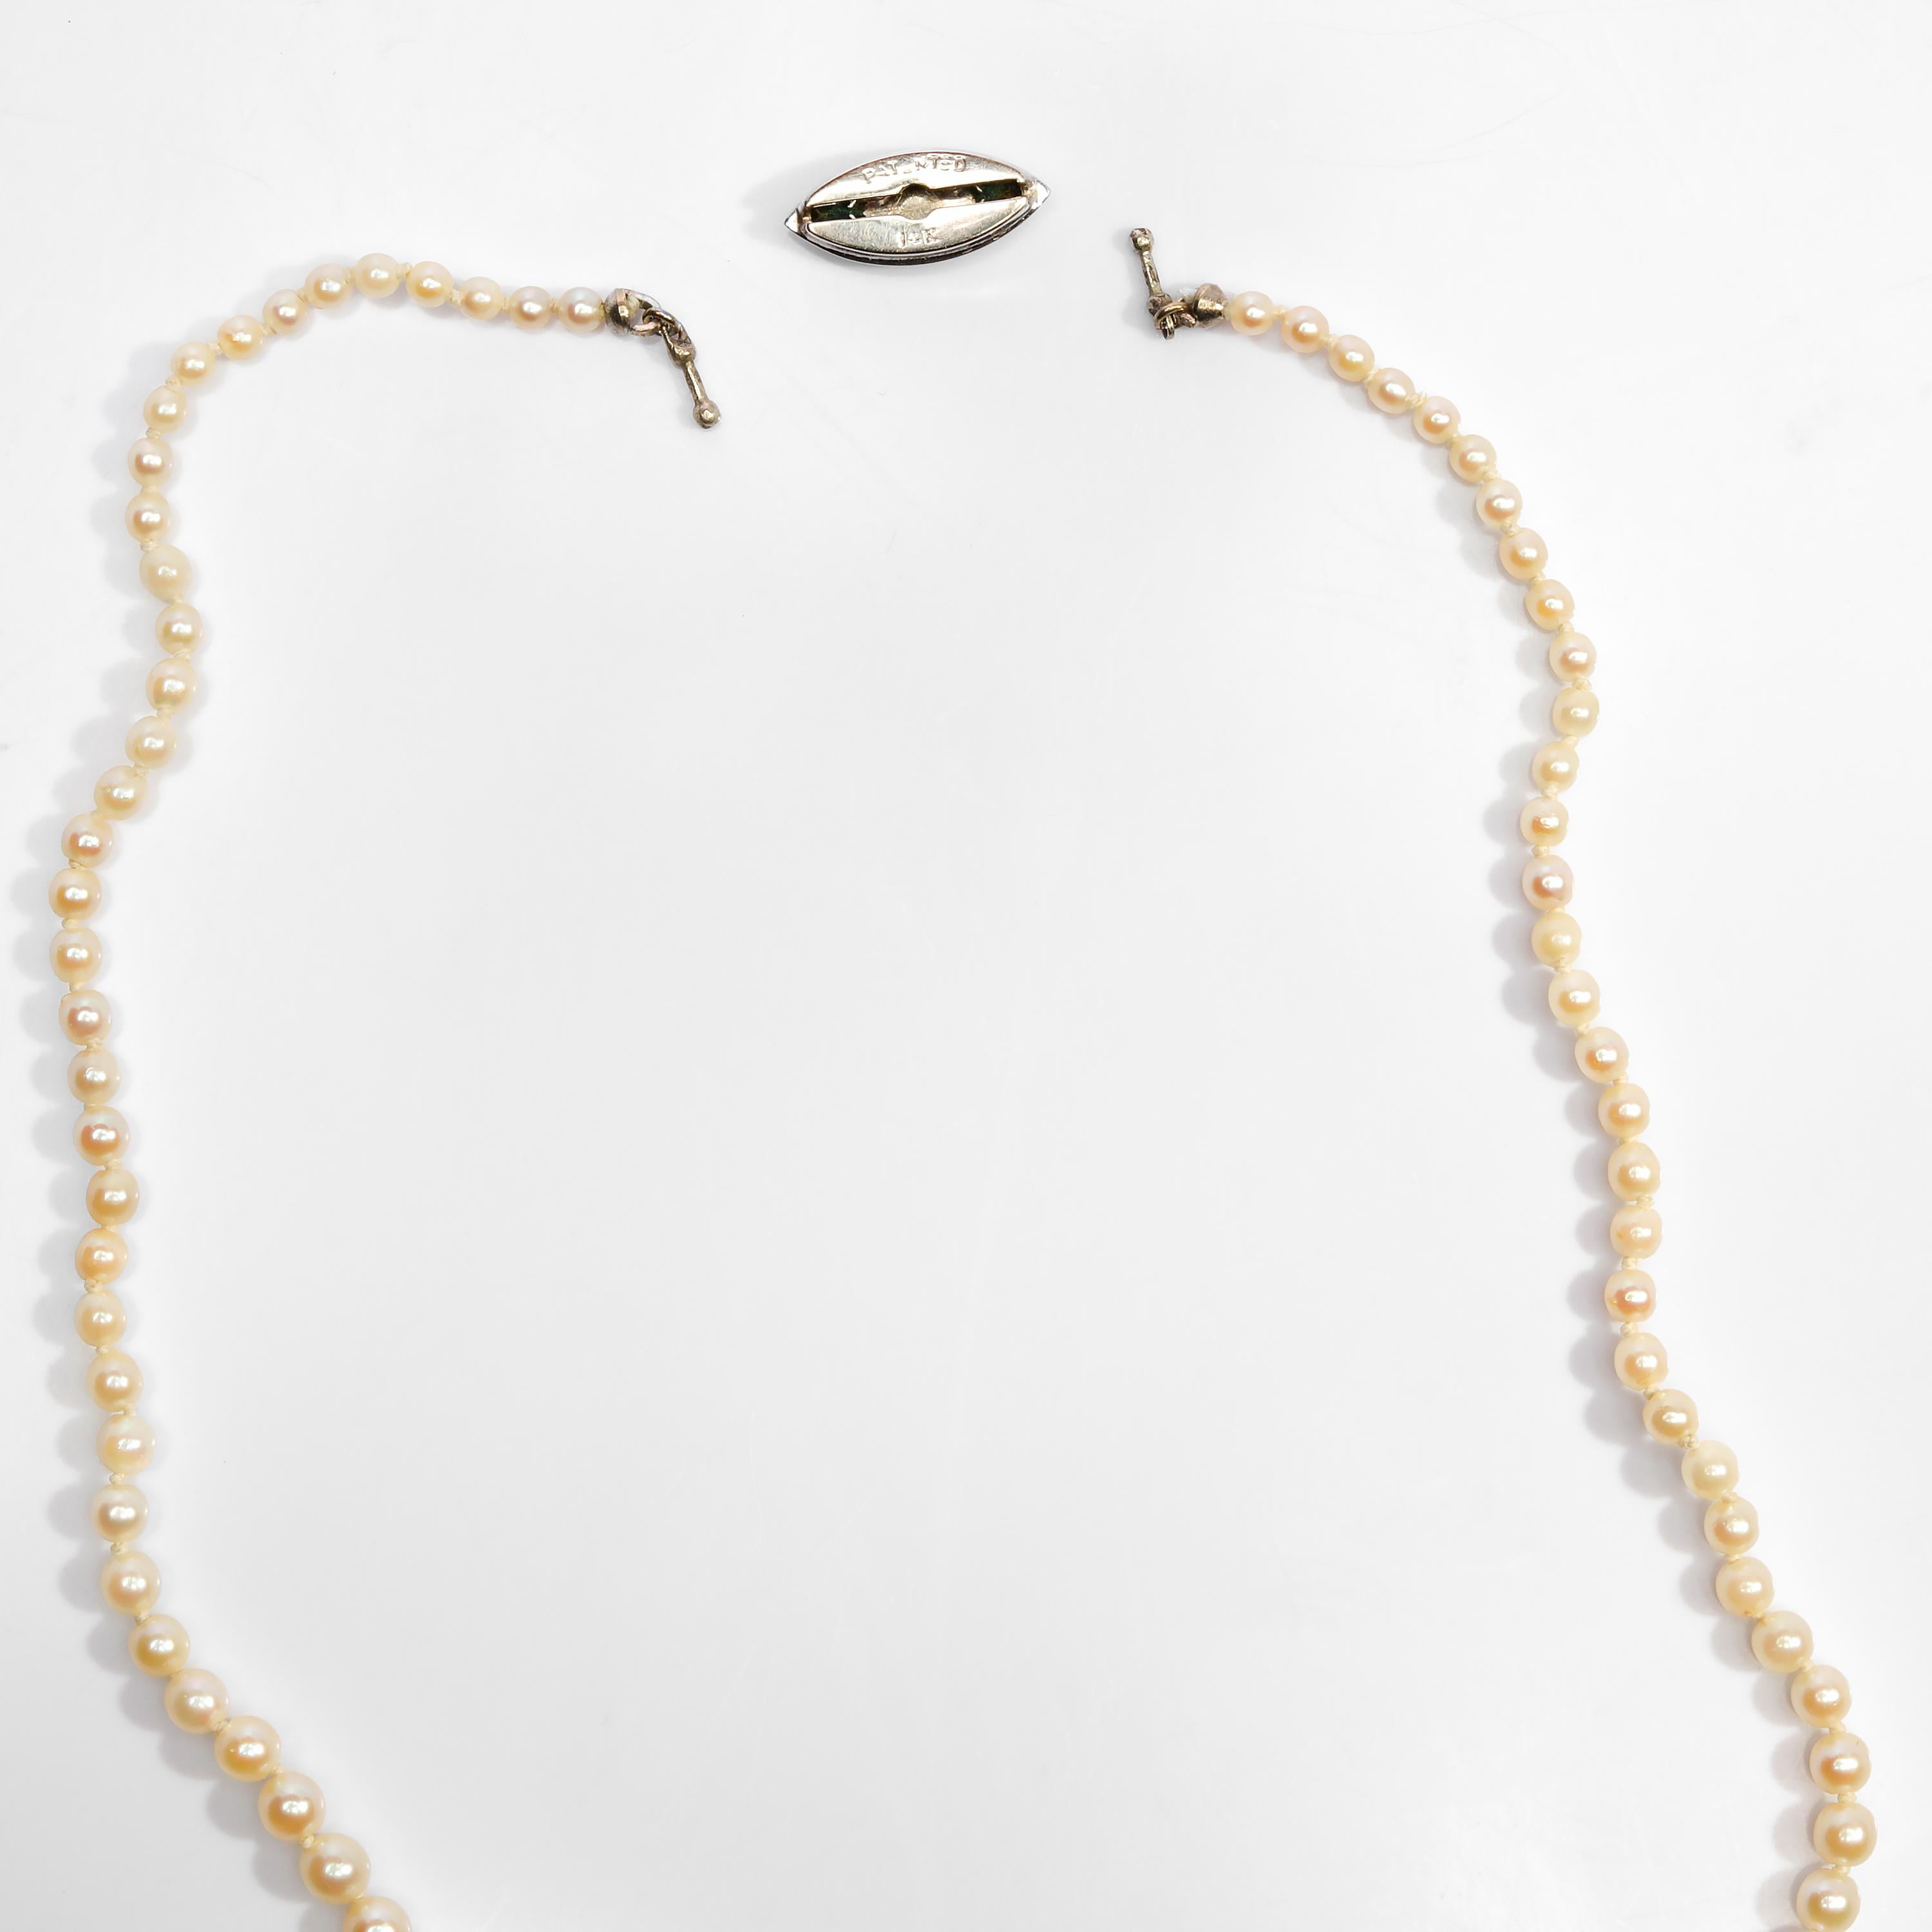 saltwater pearl necklace price